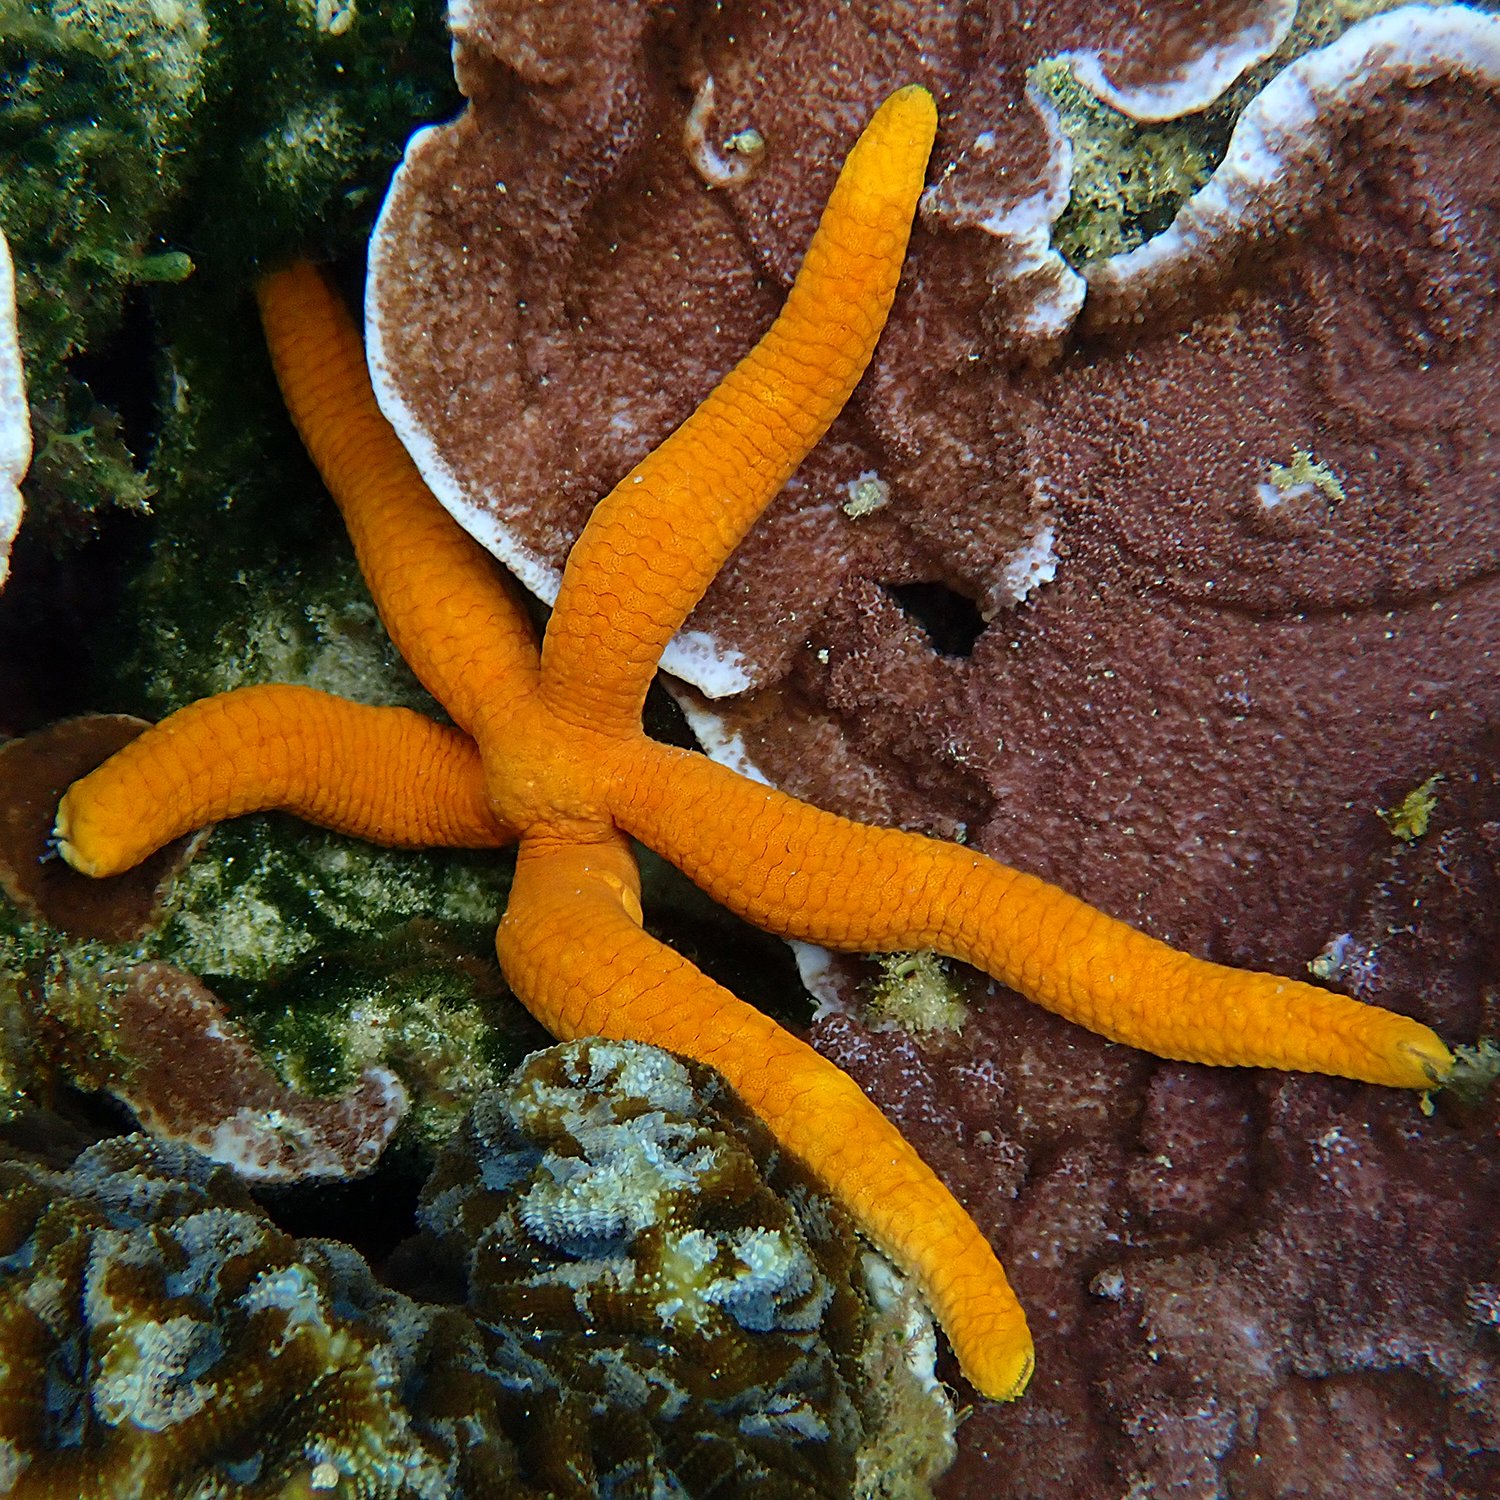 Sea stars? Starfish? What's the difference? — Norfolk Island's Reef